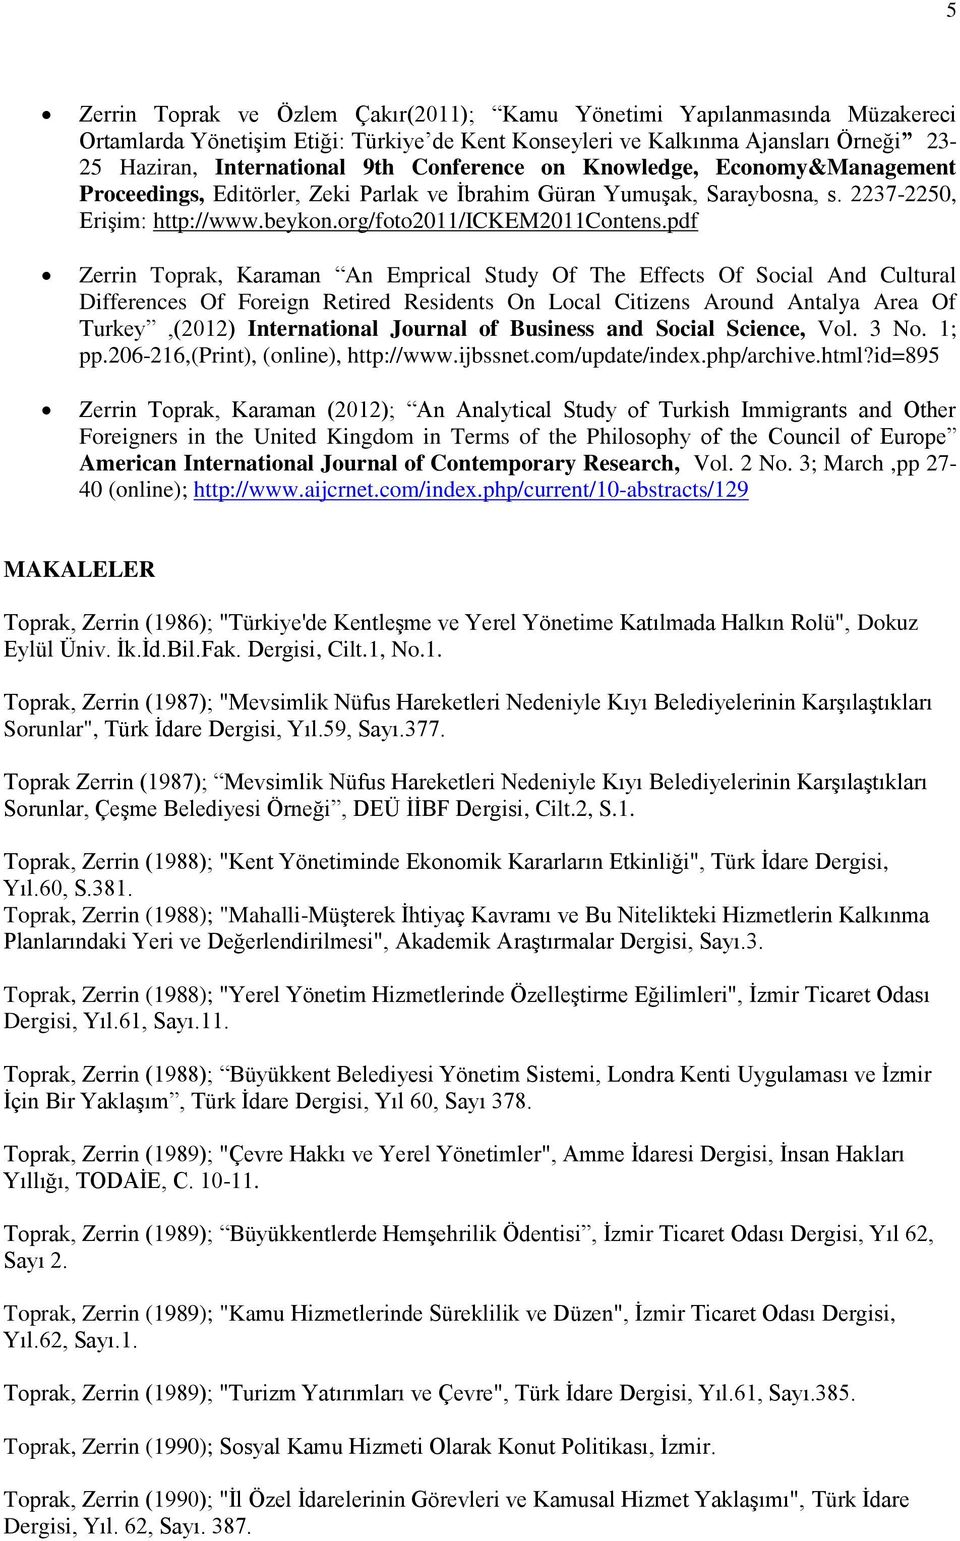 pdf Zerrin Toprak, Karaman An Emprical Study Of The Effects Of Social And Cultural Differences Of Foreign Retired Residents On Local Citizens Around Antalya Area Of Turkey,(2012) International